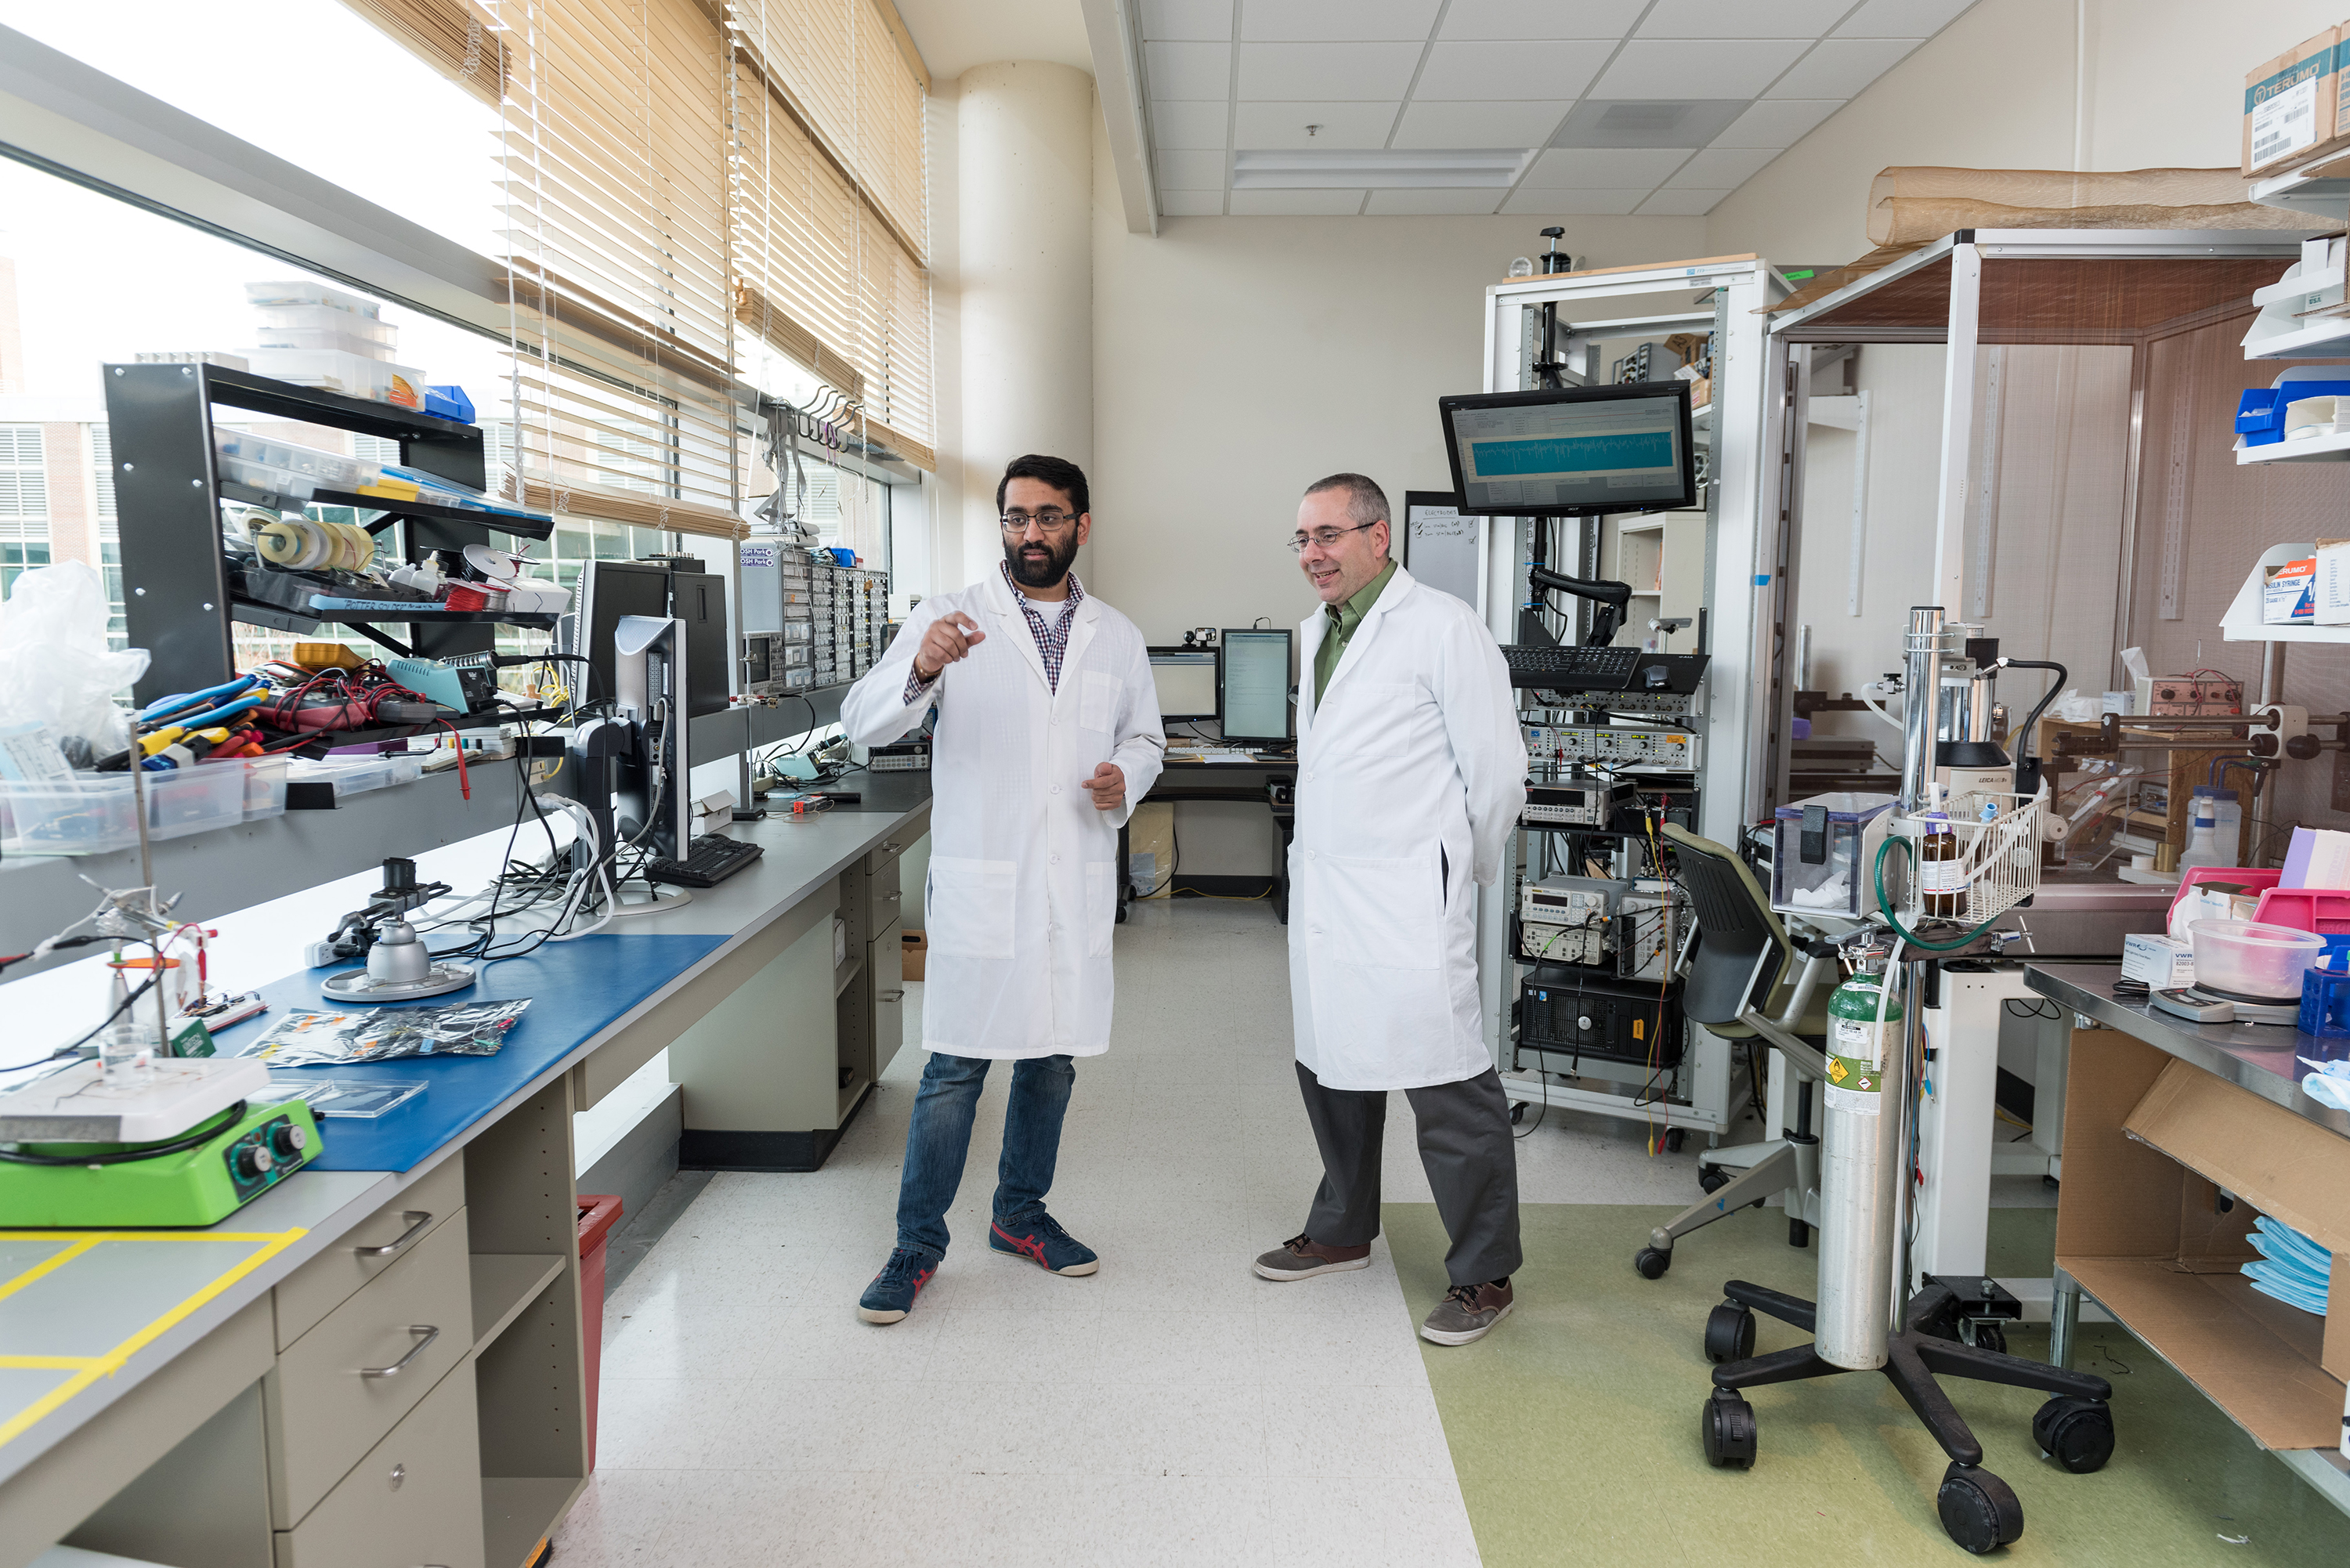 Leader researcher Yogi Patel (left) and principal investigator Robert Butera in Butera's lab on Georgia Tech's campus at the Wallace H. Coulter Department of Biomedical Engineering at Georgia Tech and Emory University. Credit: Georgia Tech / Rob Felt